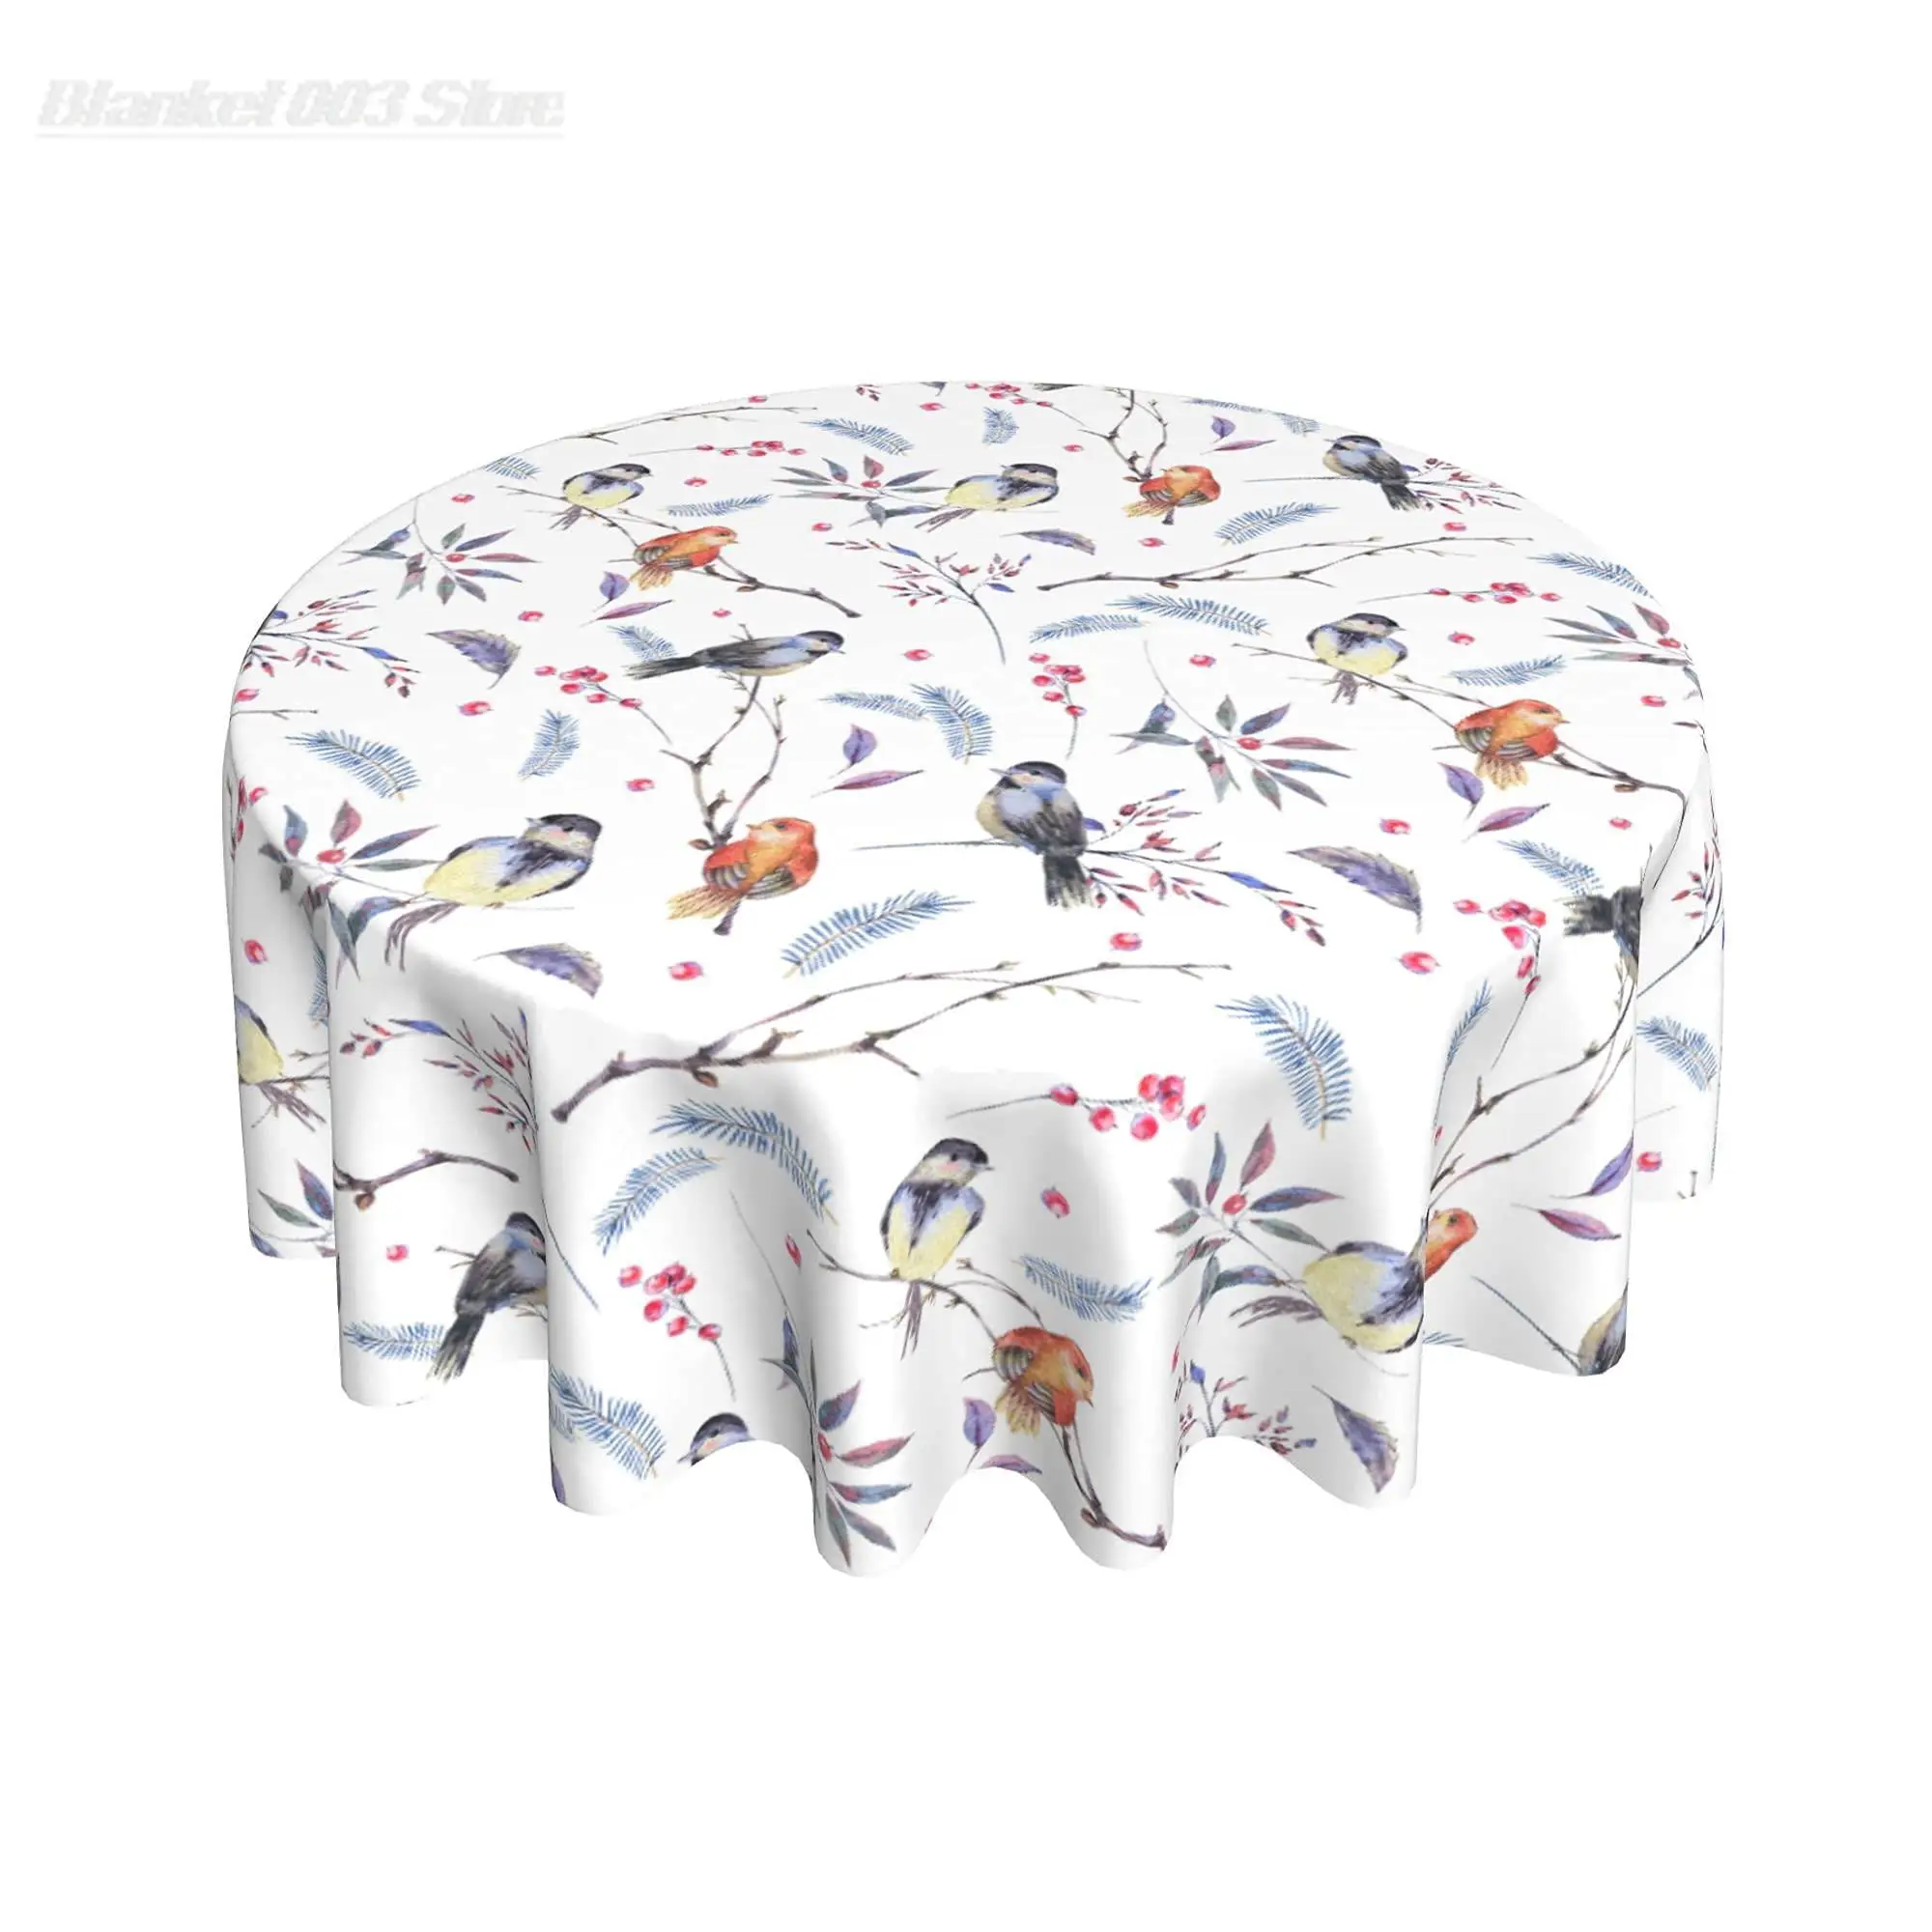 

Color Bird Tablecloth Watercolor Birds Round Tablecloth 60 Inch Waterproof Dining Table Cloth Wrinkle Resistant Colorful Table